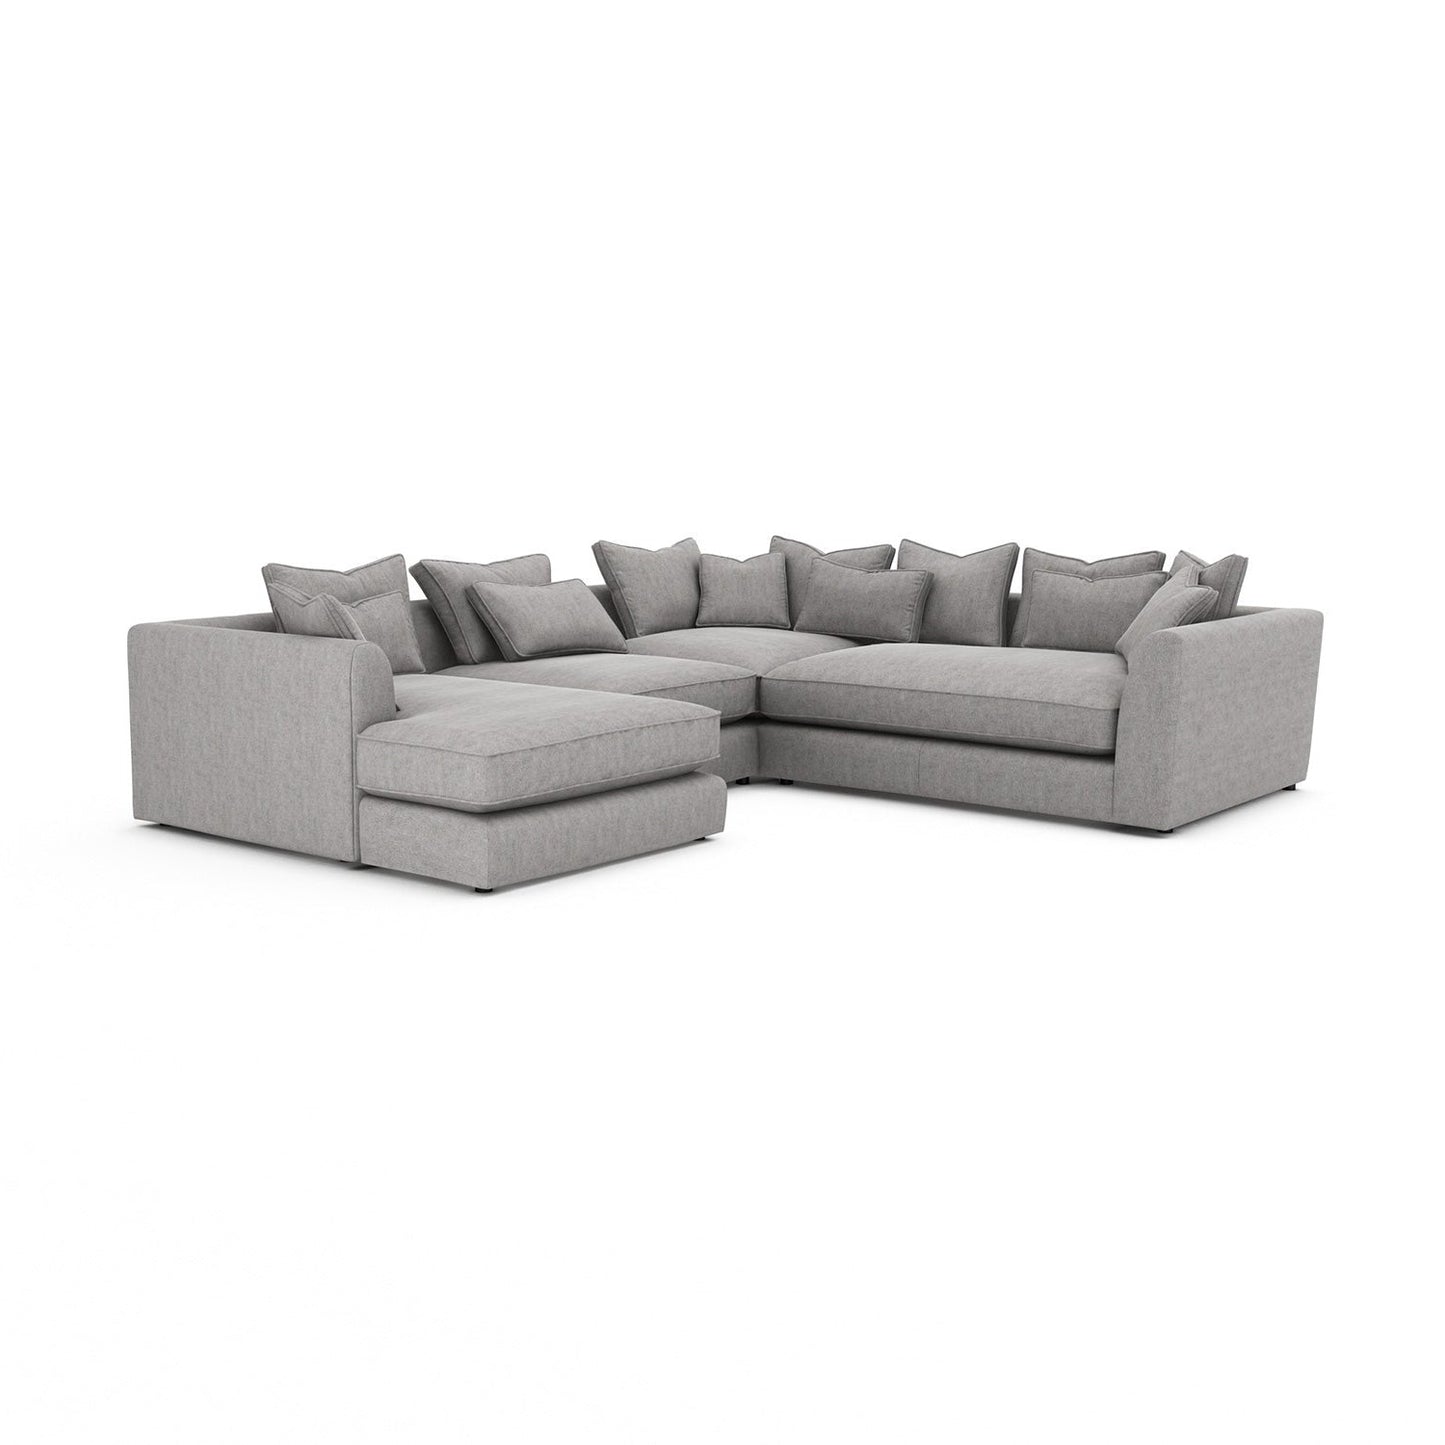 Ursula Combi Sofa With Chaise - 2a